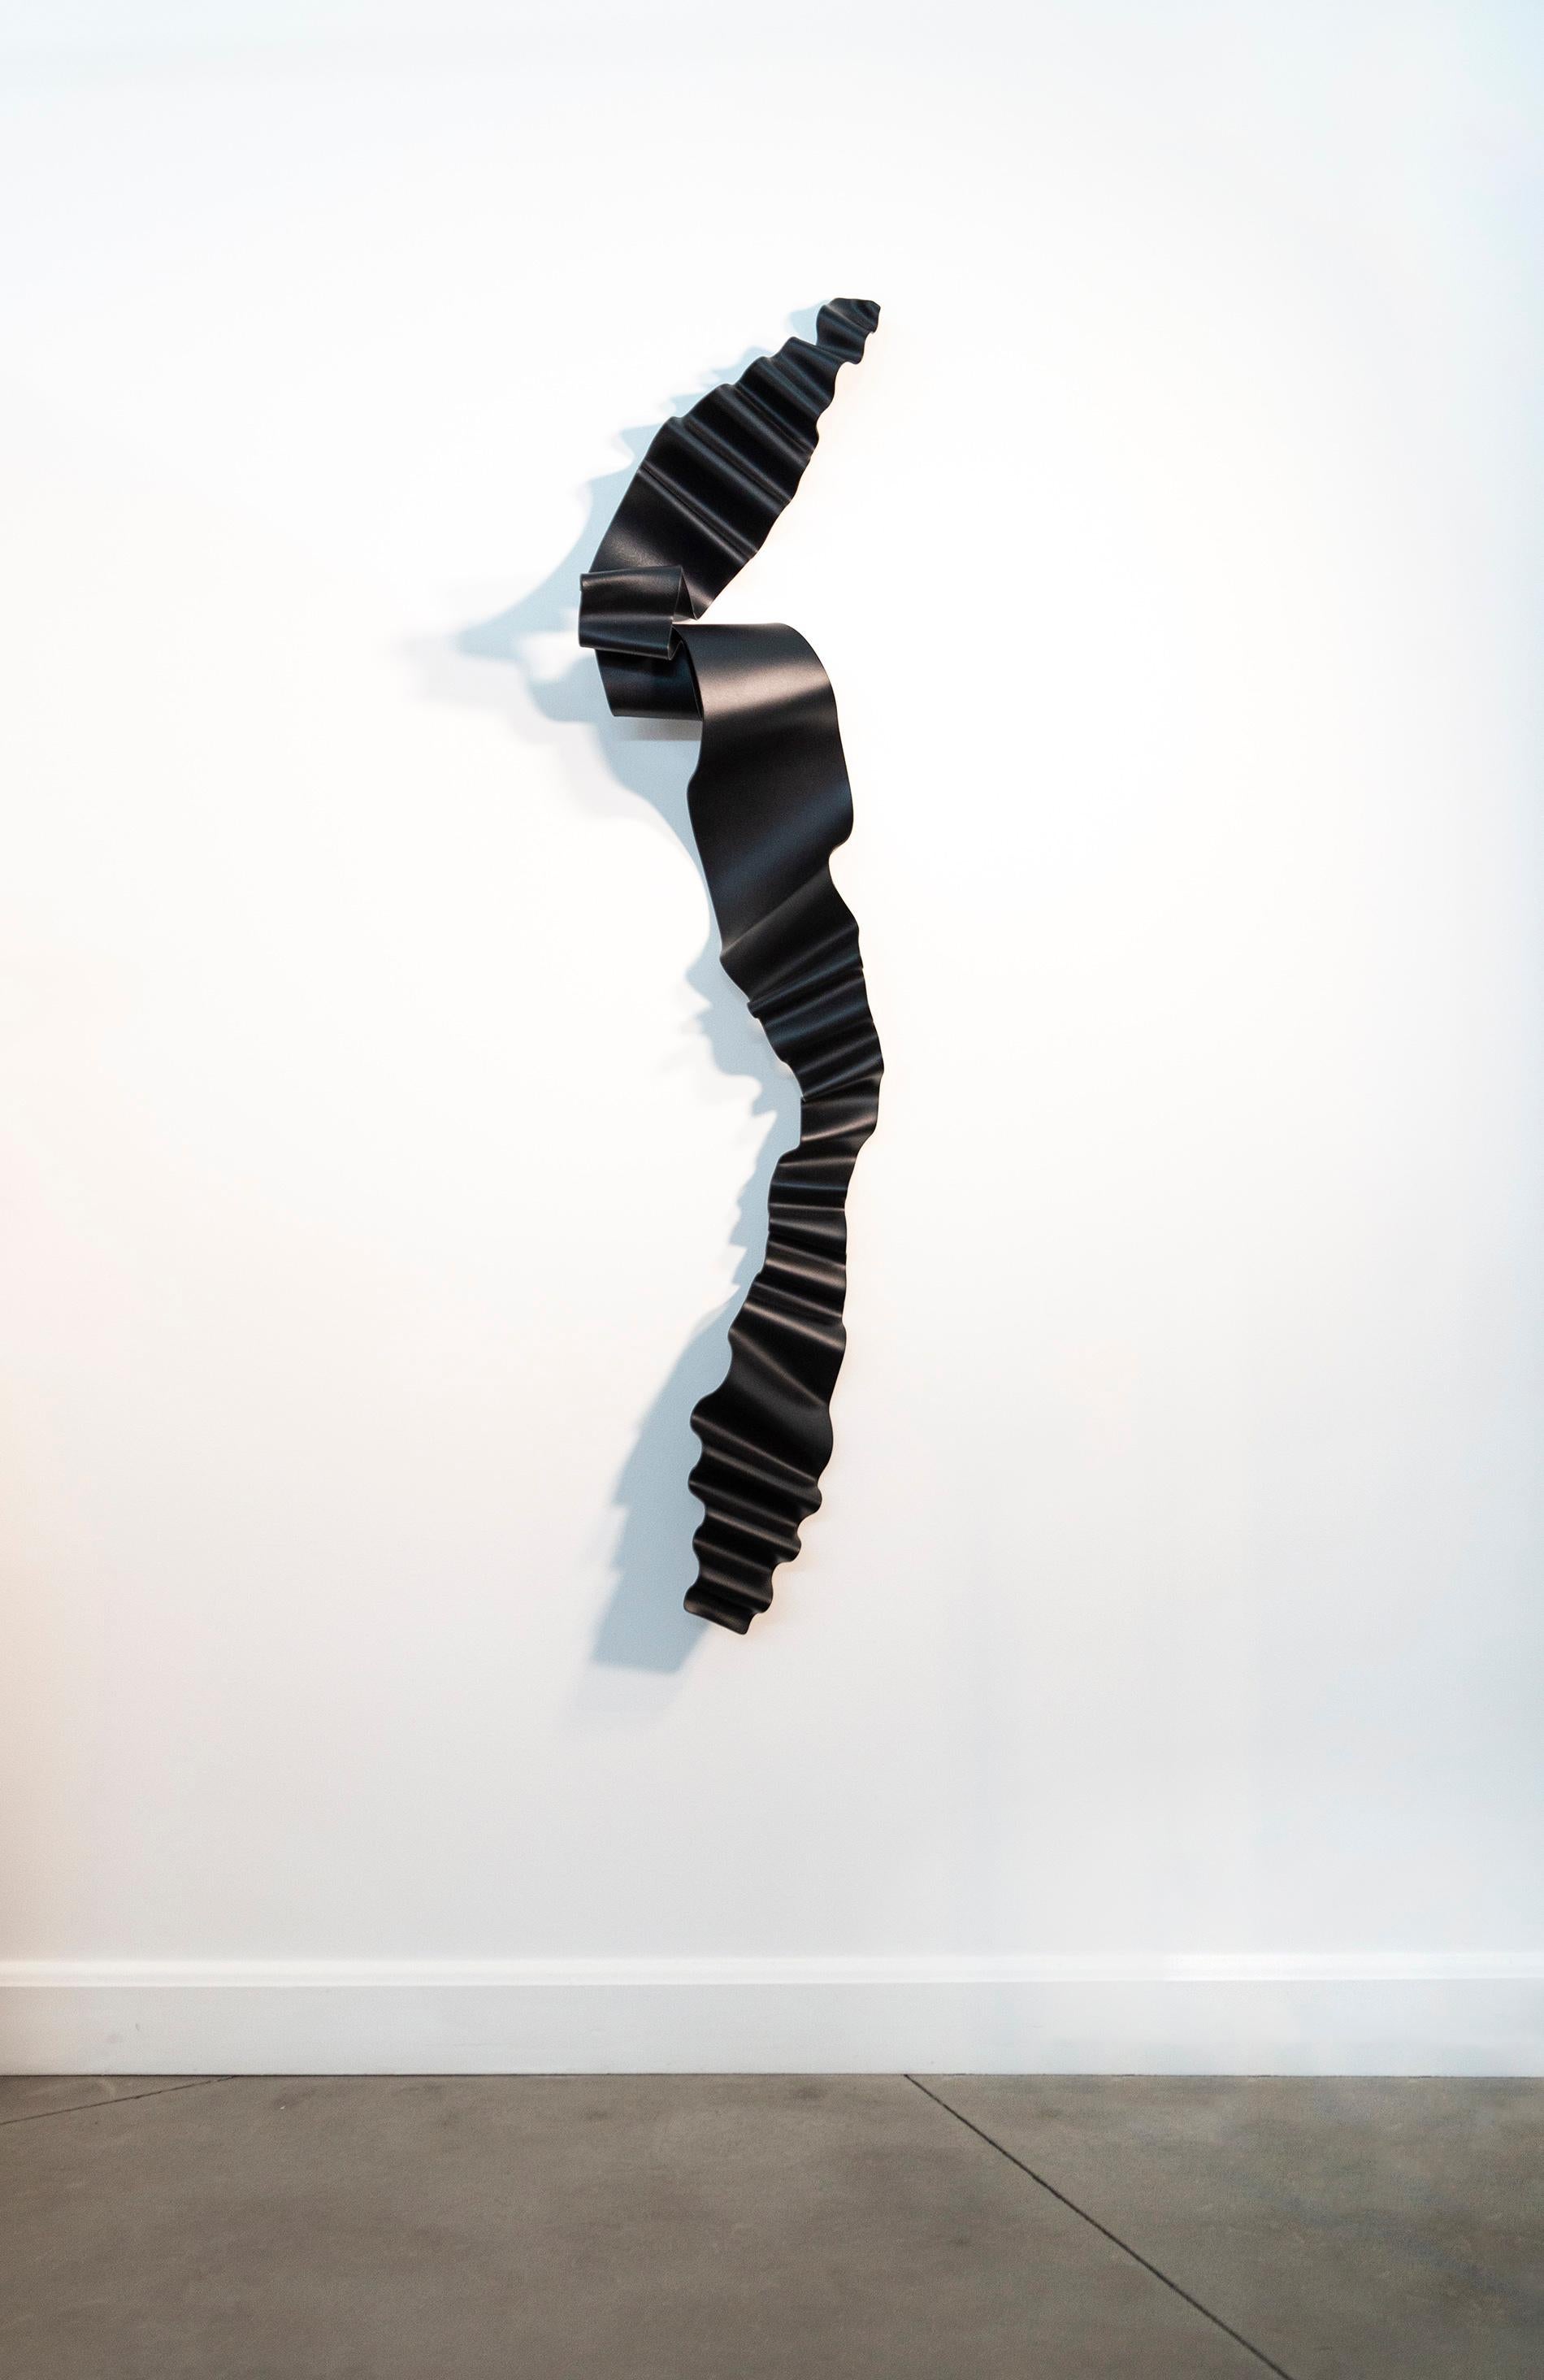 Sword of No Sword 1 - black, ribbon, powder coated steel, wall sculpture - Contemporary Sculpture by Stefan Duerst